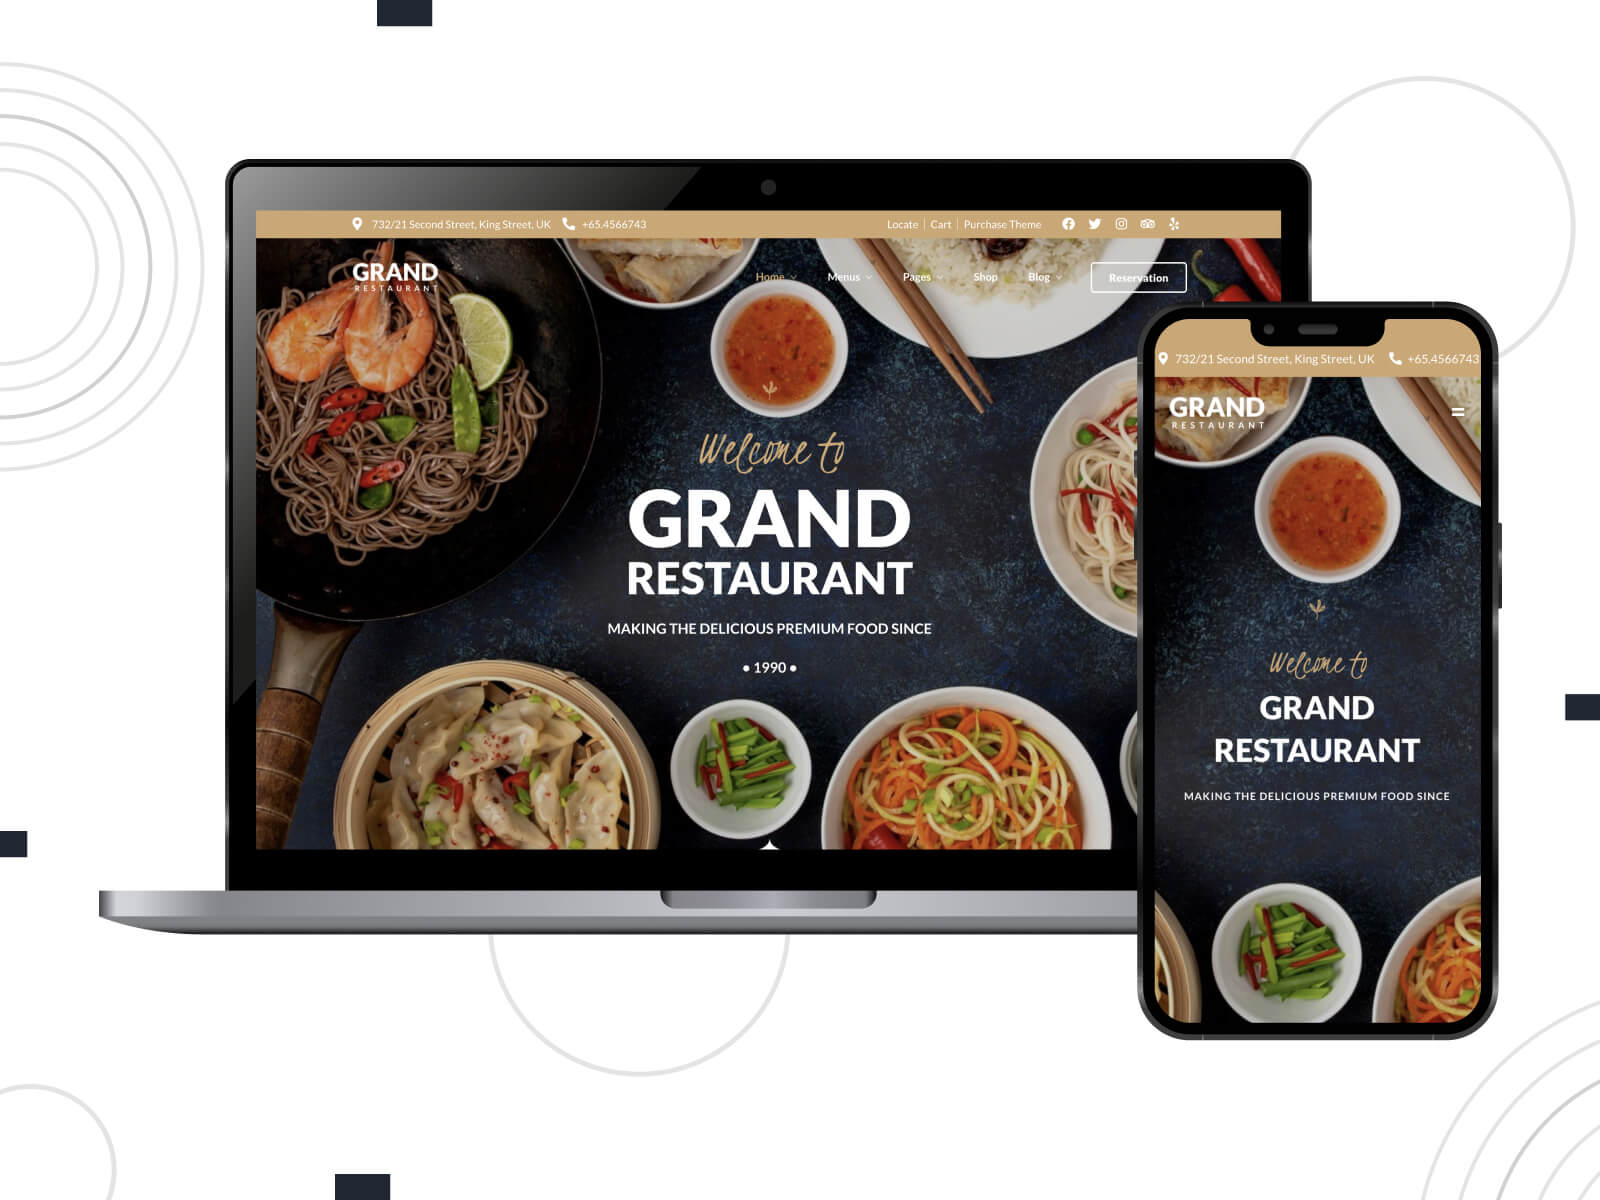 Snapshot of Grand Restaurant - dark, inviting, grid-style WordPress theme for showcasing meal delivery options in rosy brown, and sienna color range.